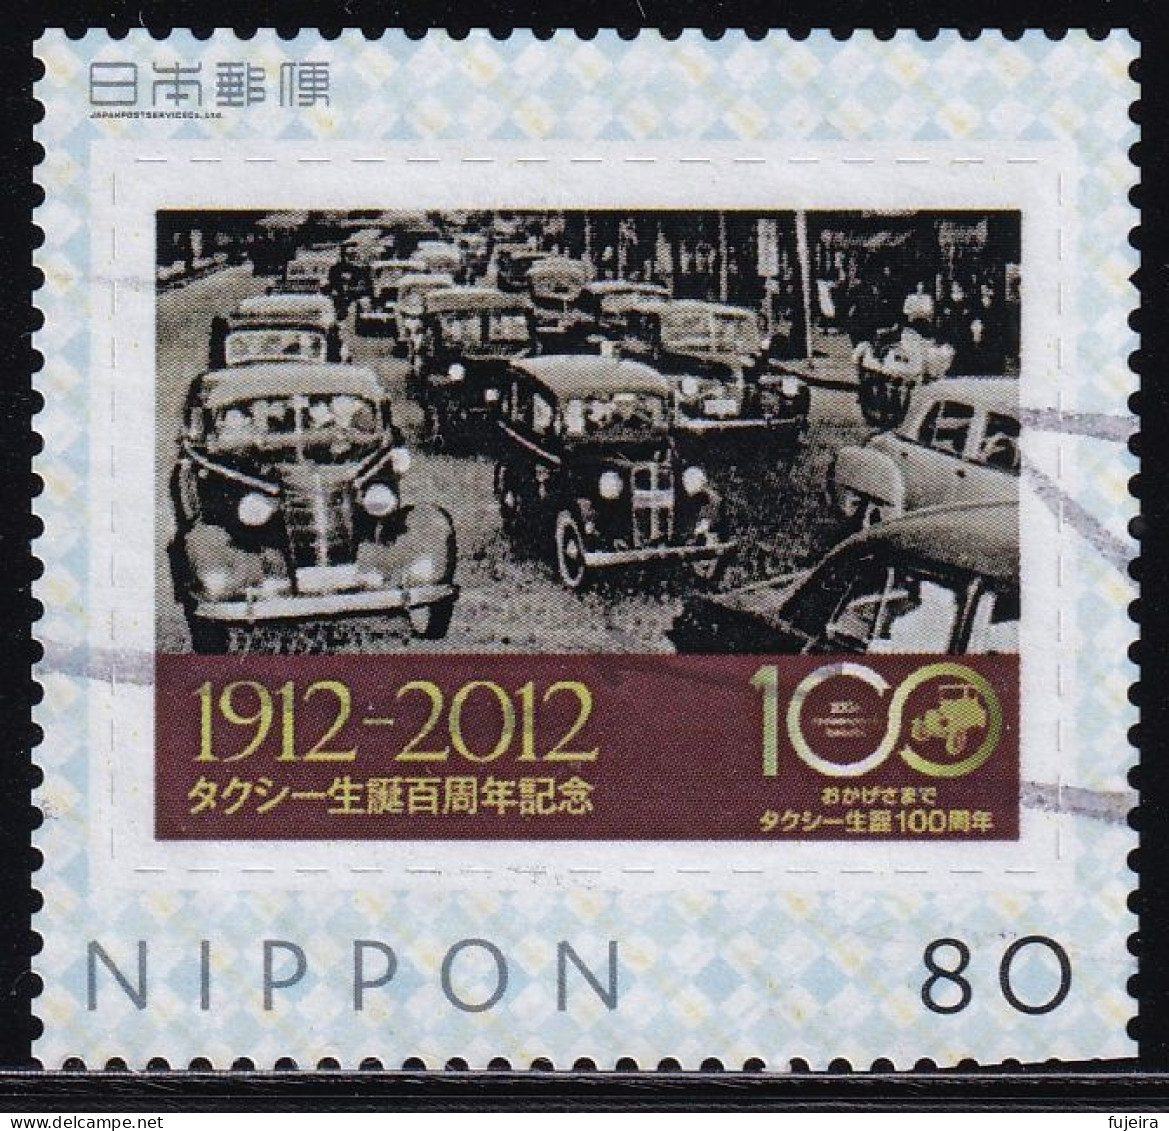 Japan Personalized Stamp, Taxi (jpw0062) Used - Used Stamps